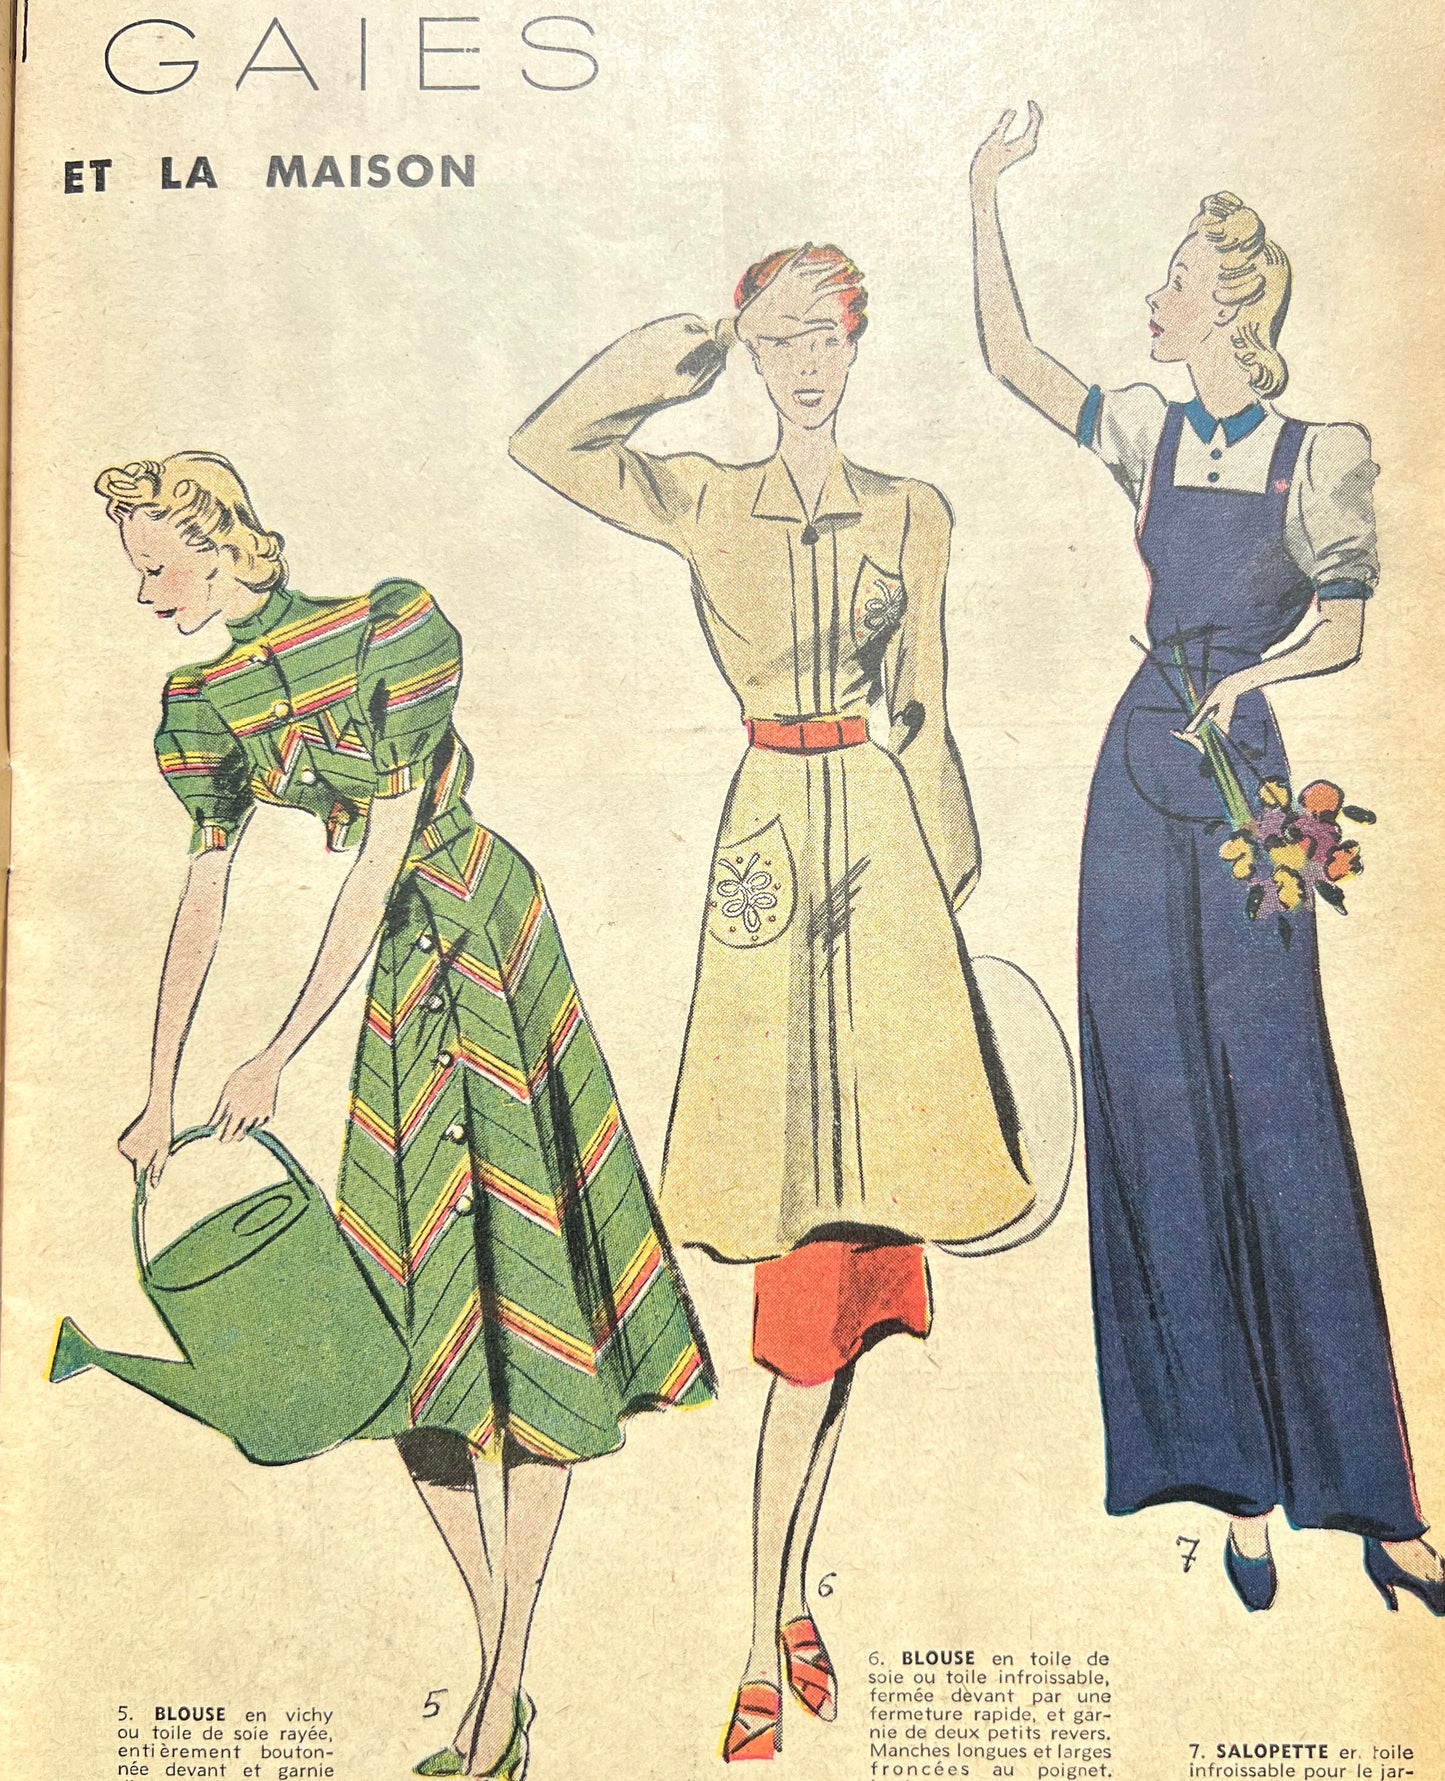 Gorgeous May 1939 Fashion, Dolls, Hats, Crafts in French Womens Magazine Nouveaute